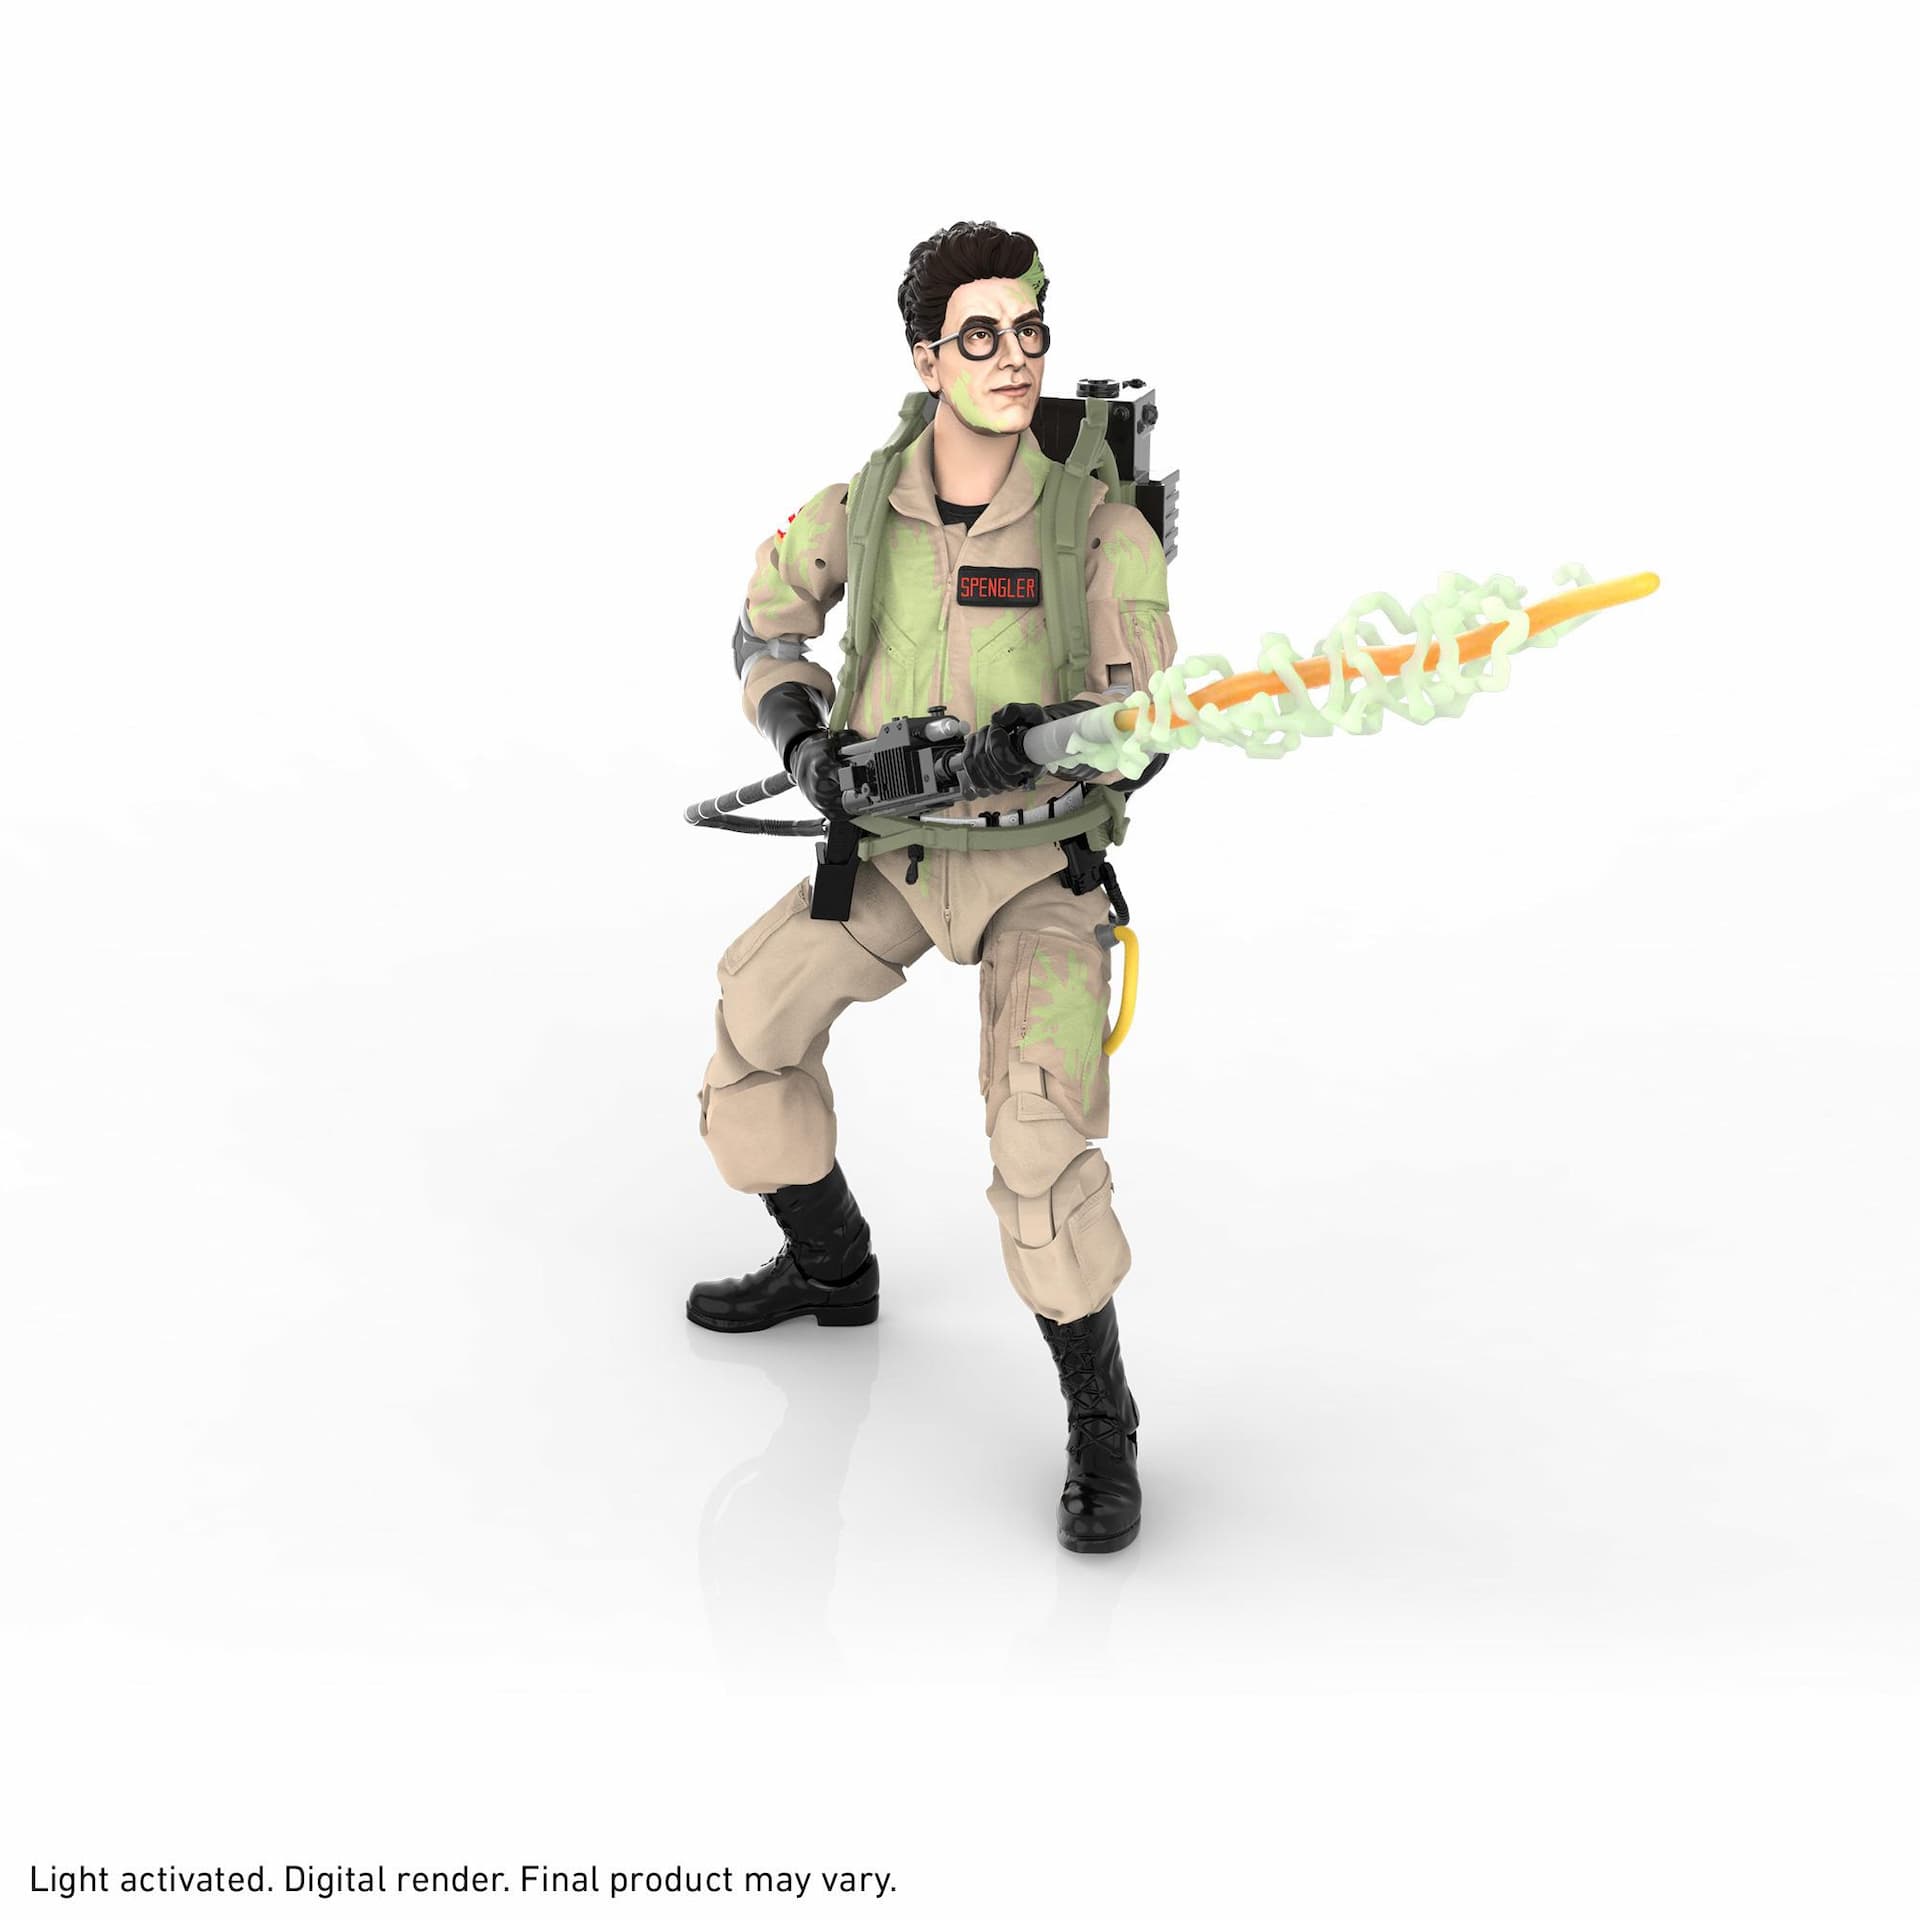 Ghostbusters Plasma Series Glow-in-the-Dark Egon Spengler Toy 6-Inch-Scale Collectible Classic 1984 Ghostbusters Figure